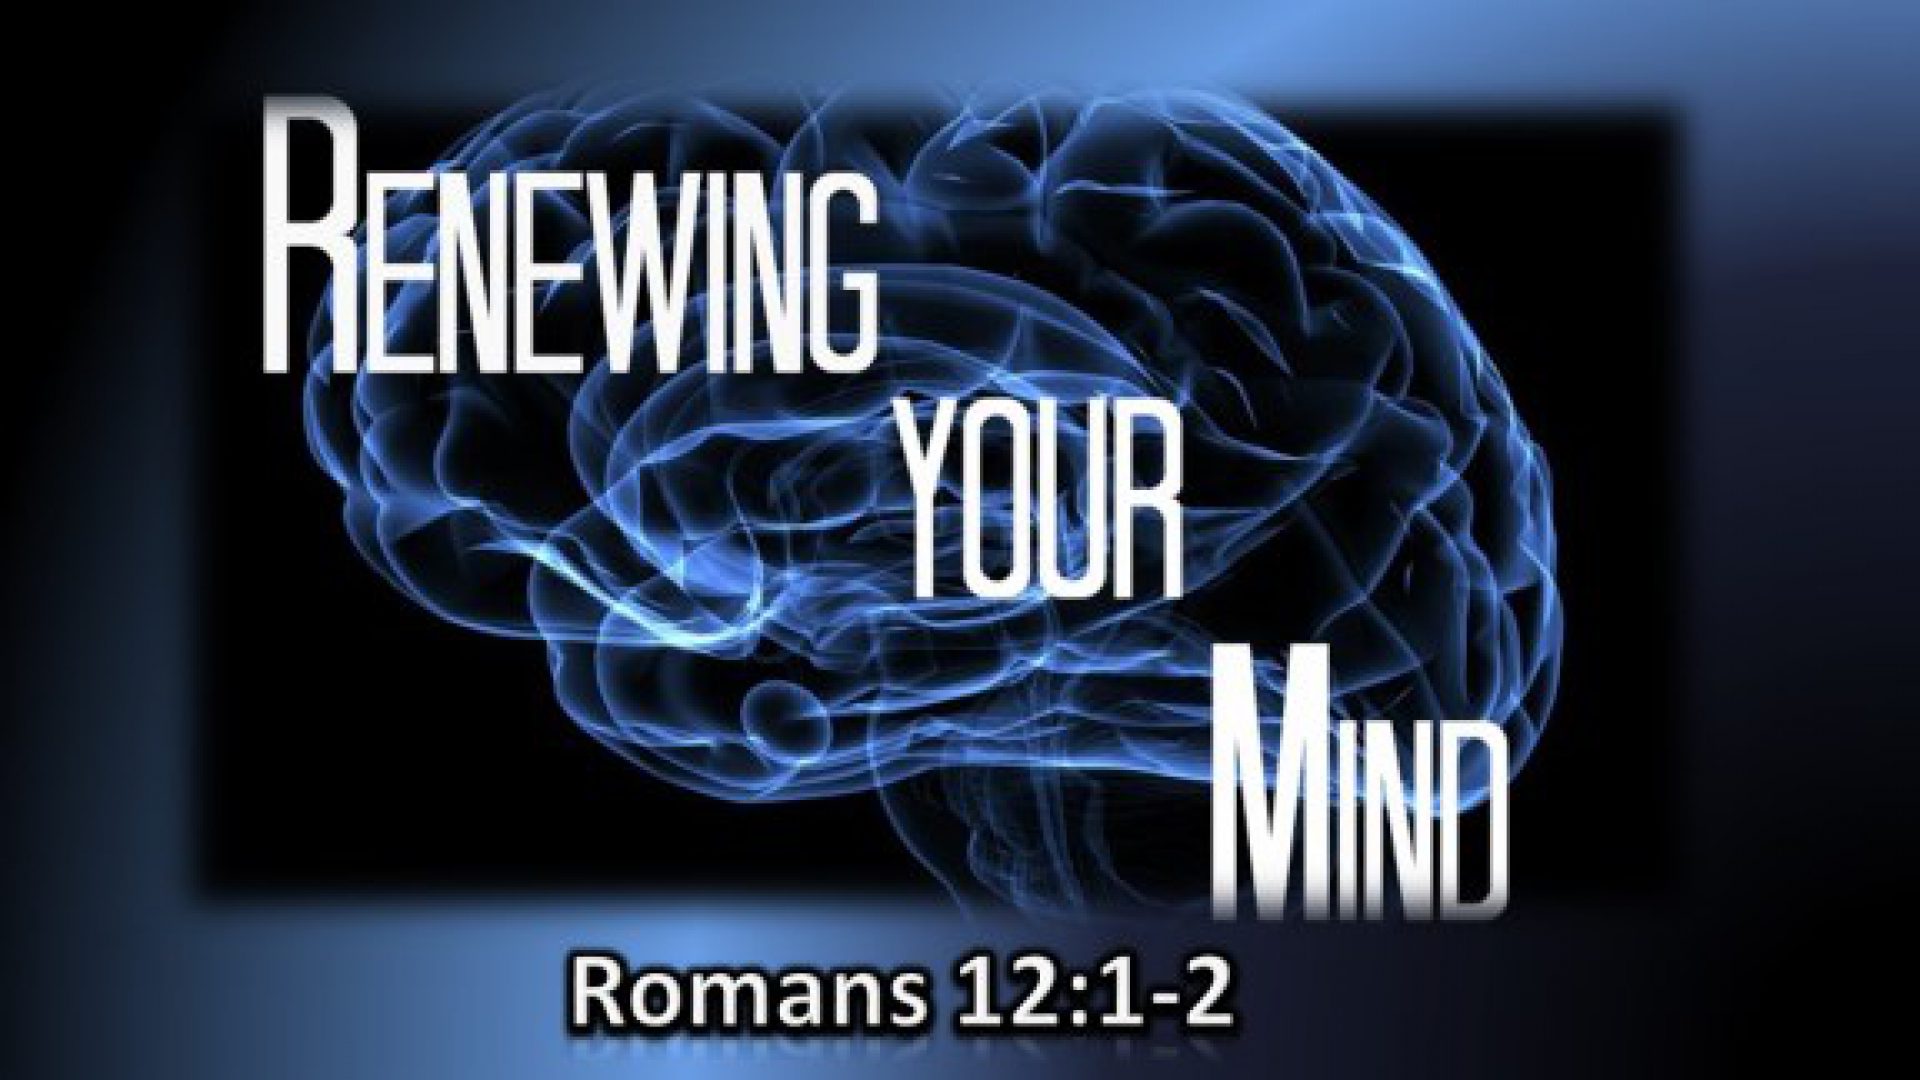 RENEWING THE SPIRIT OF YOUR MIND